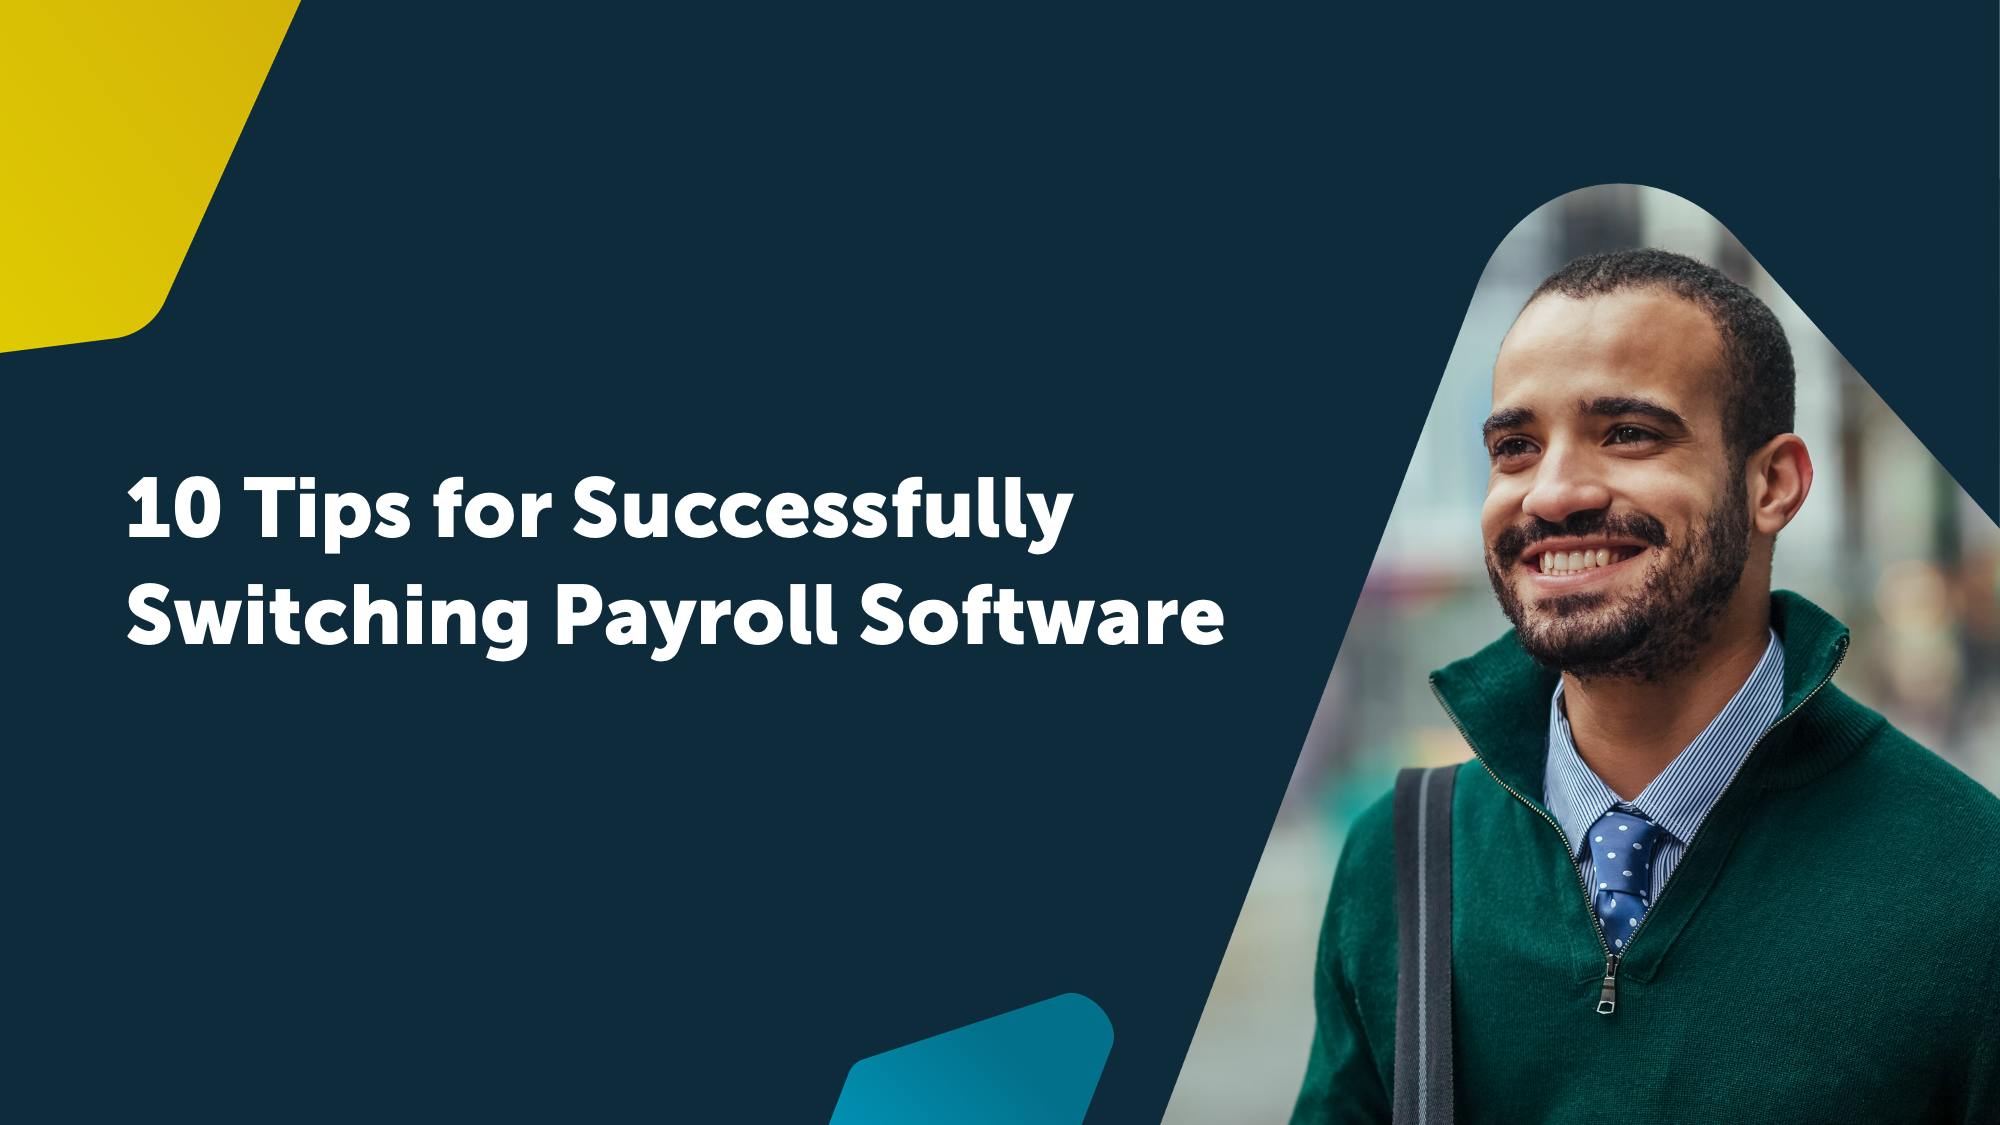 10 Tips for Successfully Switching Payroll Software